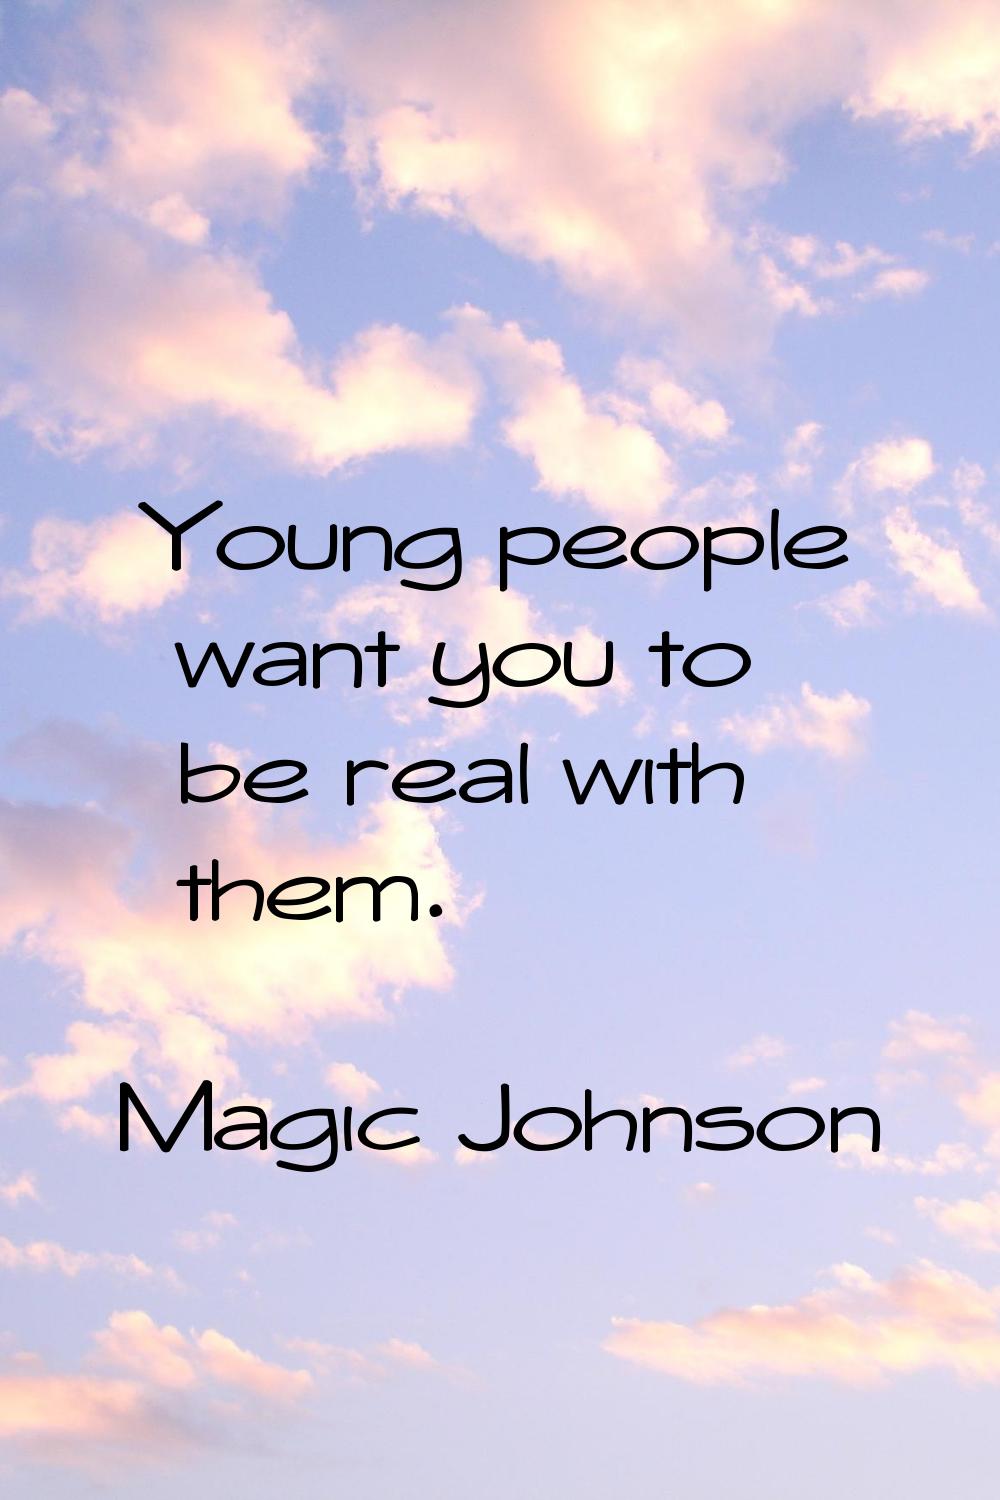 Young people want you to be real with them.